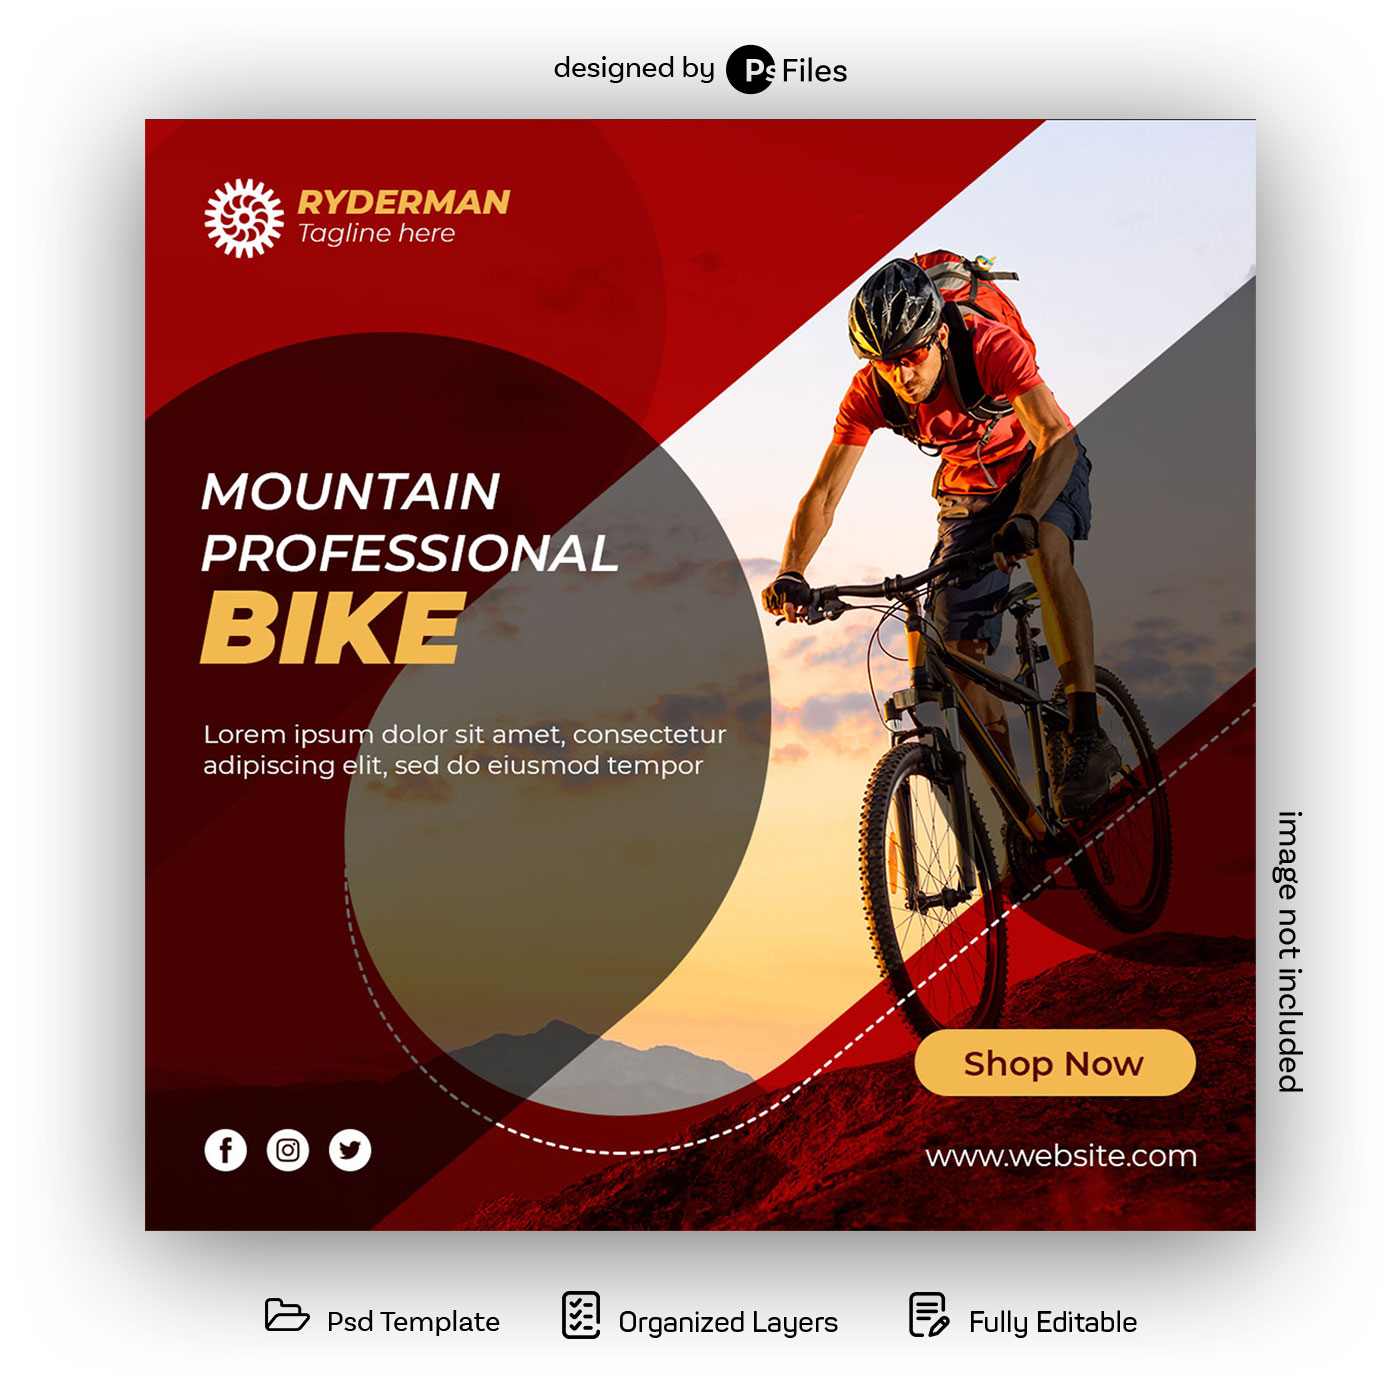 PsFiles Free Instagram Post Design PSD Template for Mountain Bike